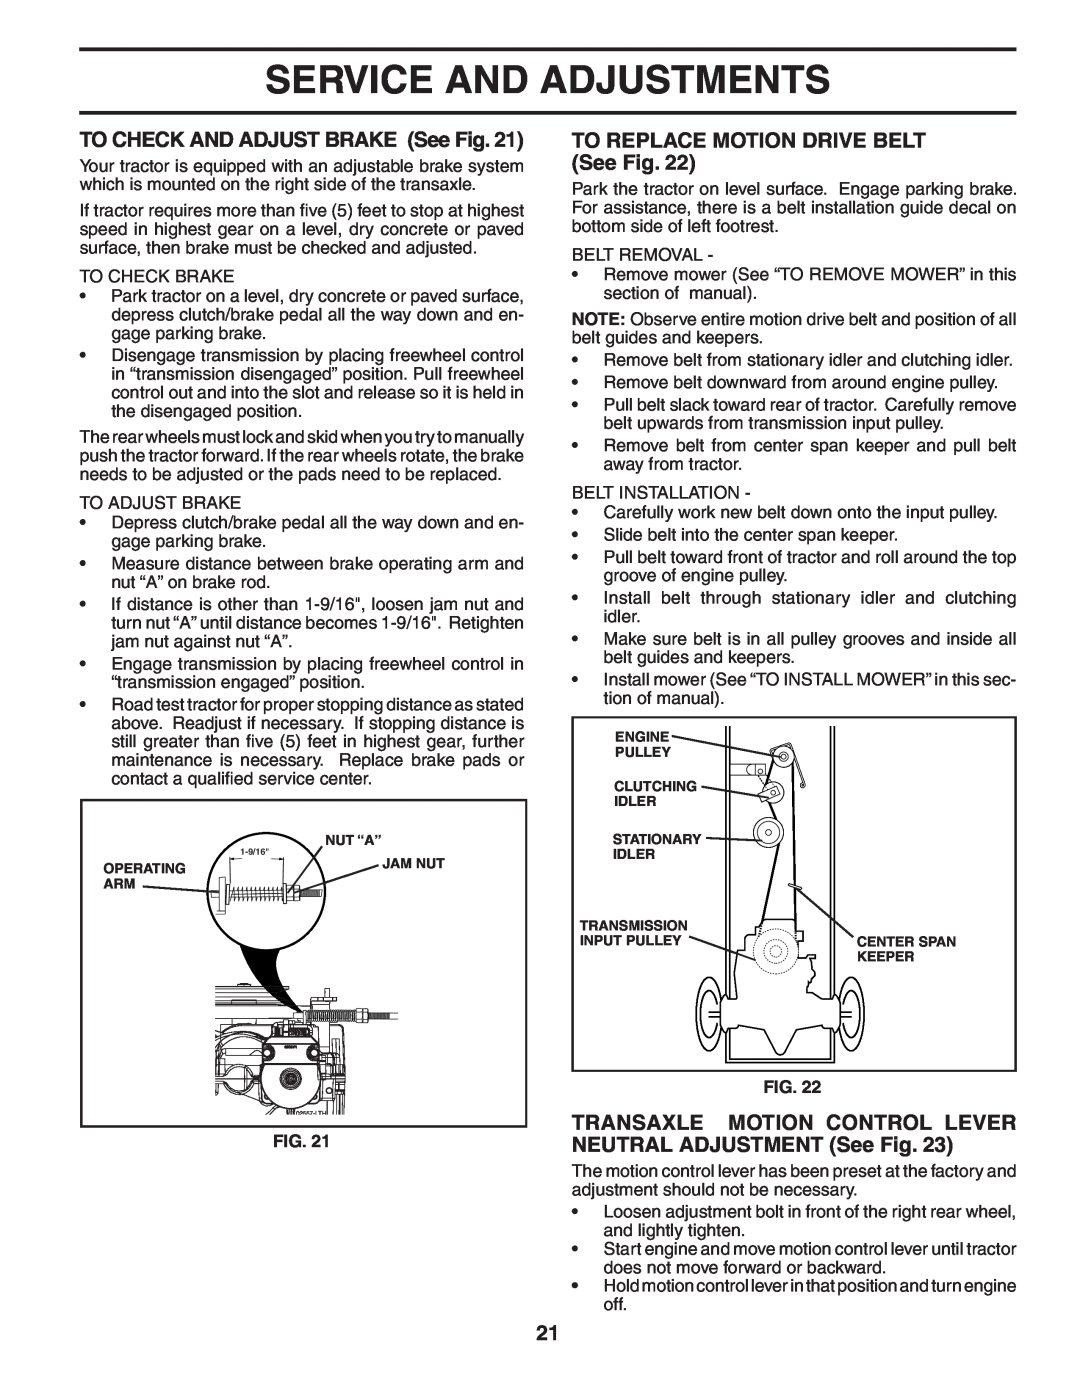 Poulan BB185H42LT manual TO CHECK AND ADJUST BRAKE See Fig, TO REPLACE MOTION DRIVE BELT See Fig, Service And Adjustments 